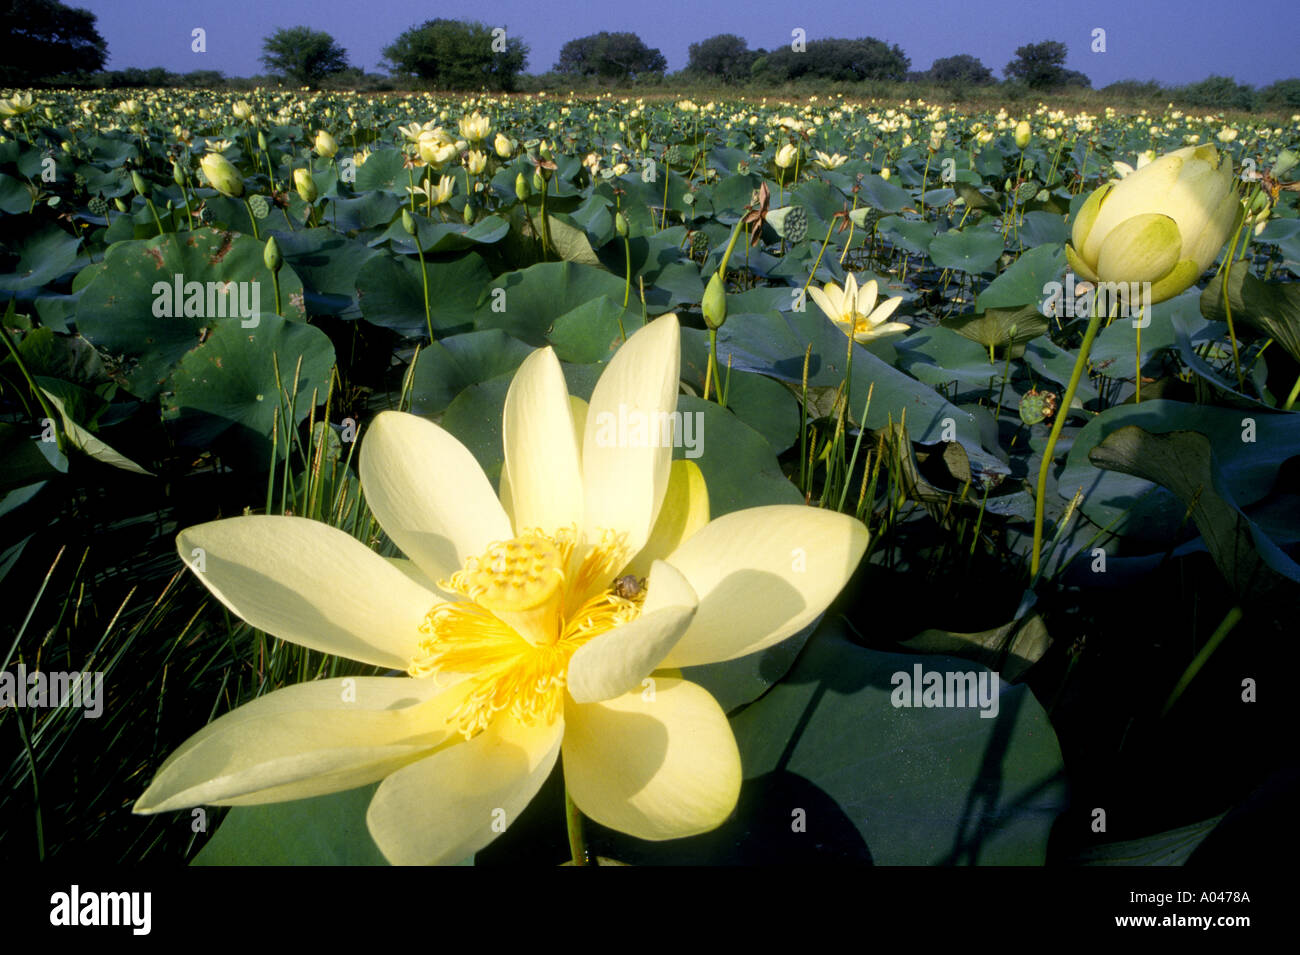 https://c8.alamy.com/comp/A0478A/american-lotus-nelumbo-lutea-found-in-bee-county-texas-wild-flowers-A0478A.jpg